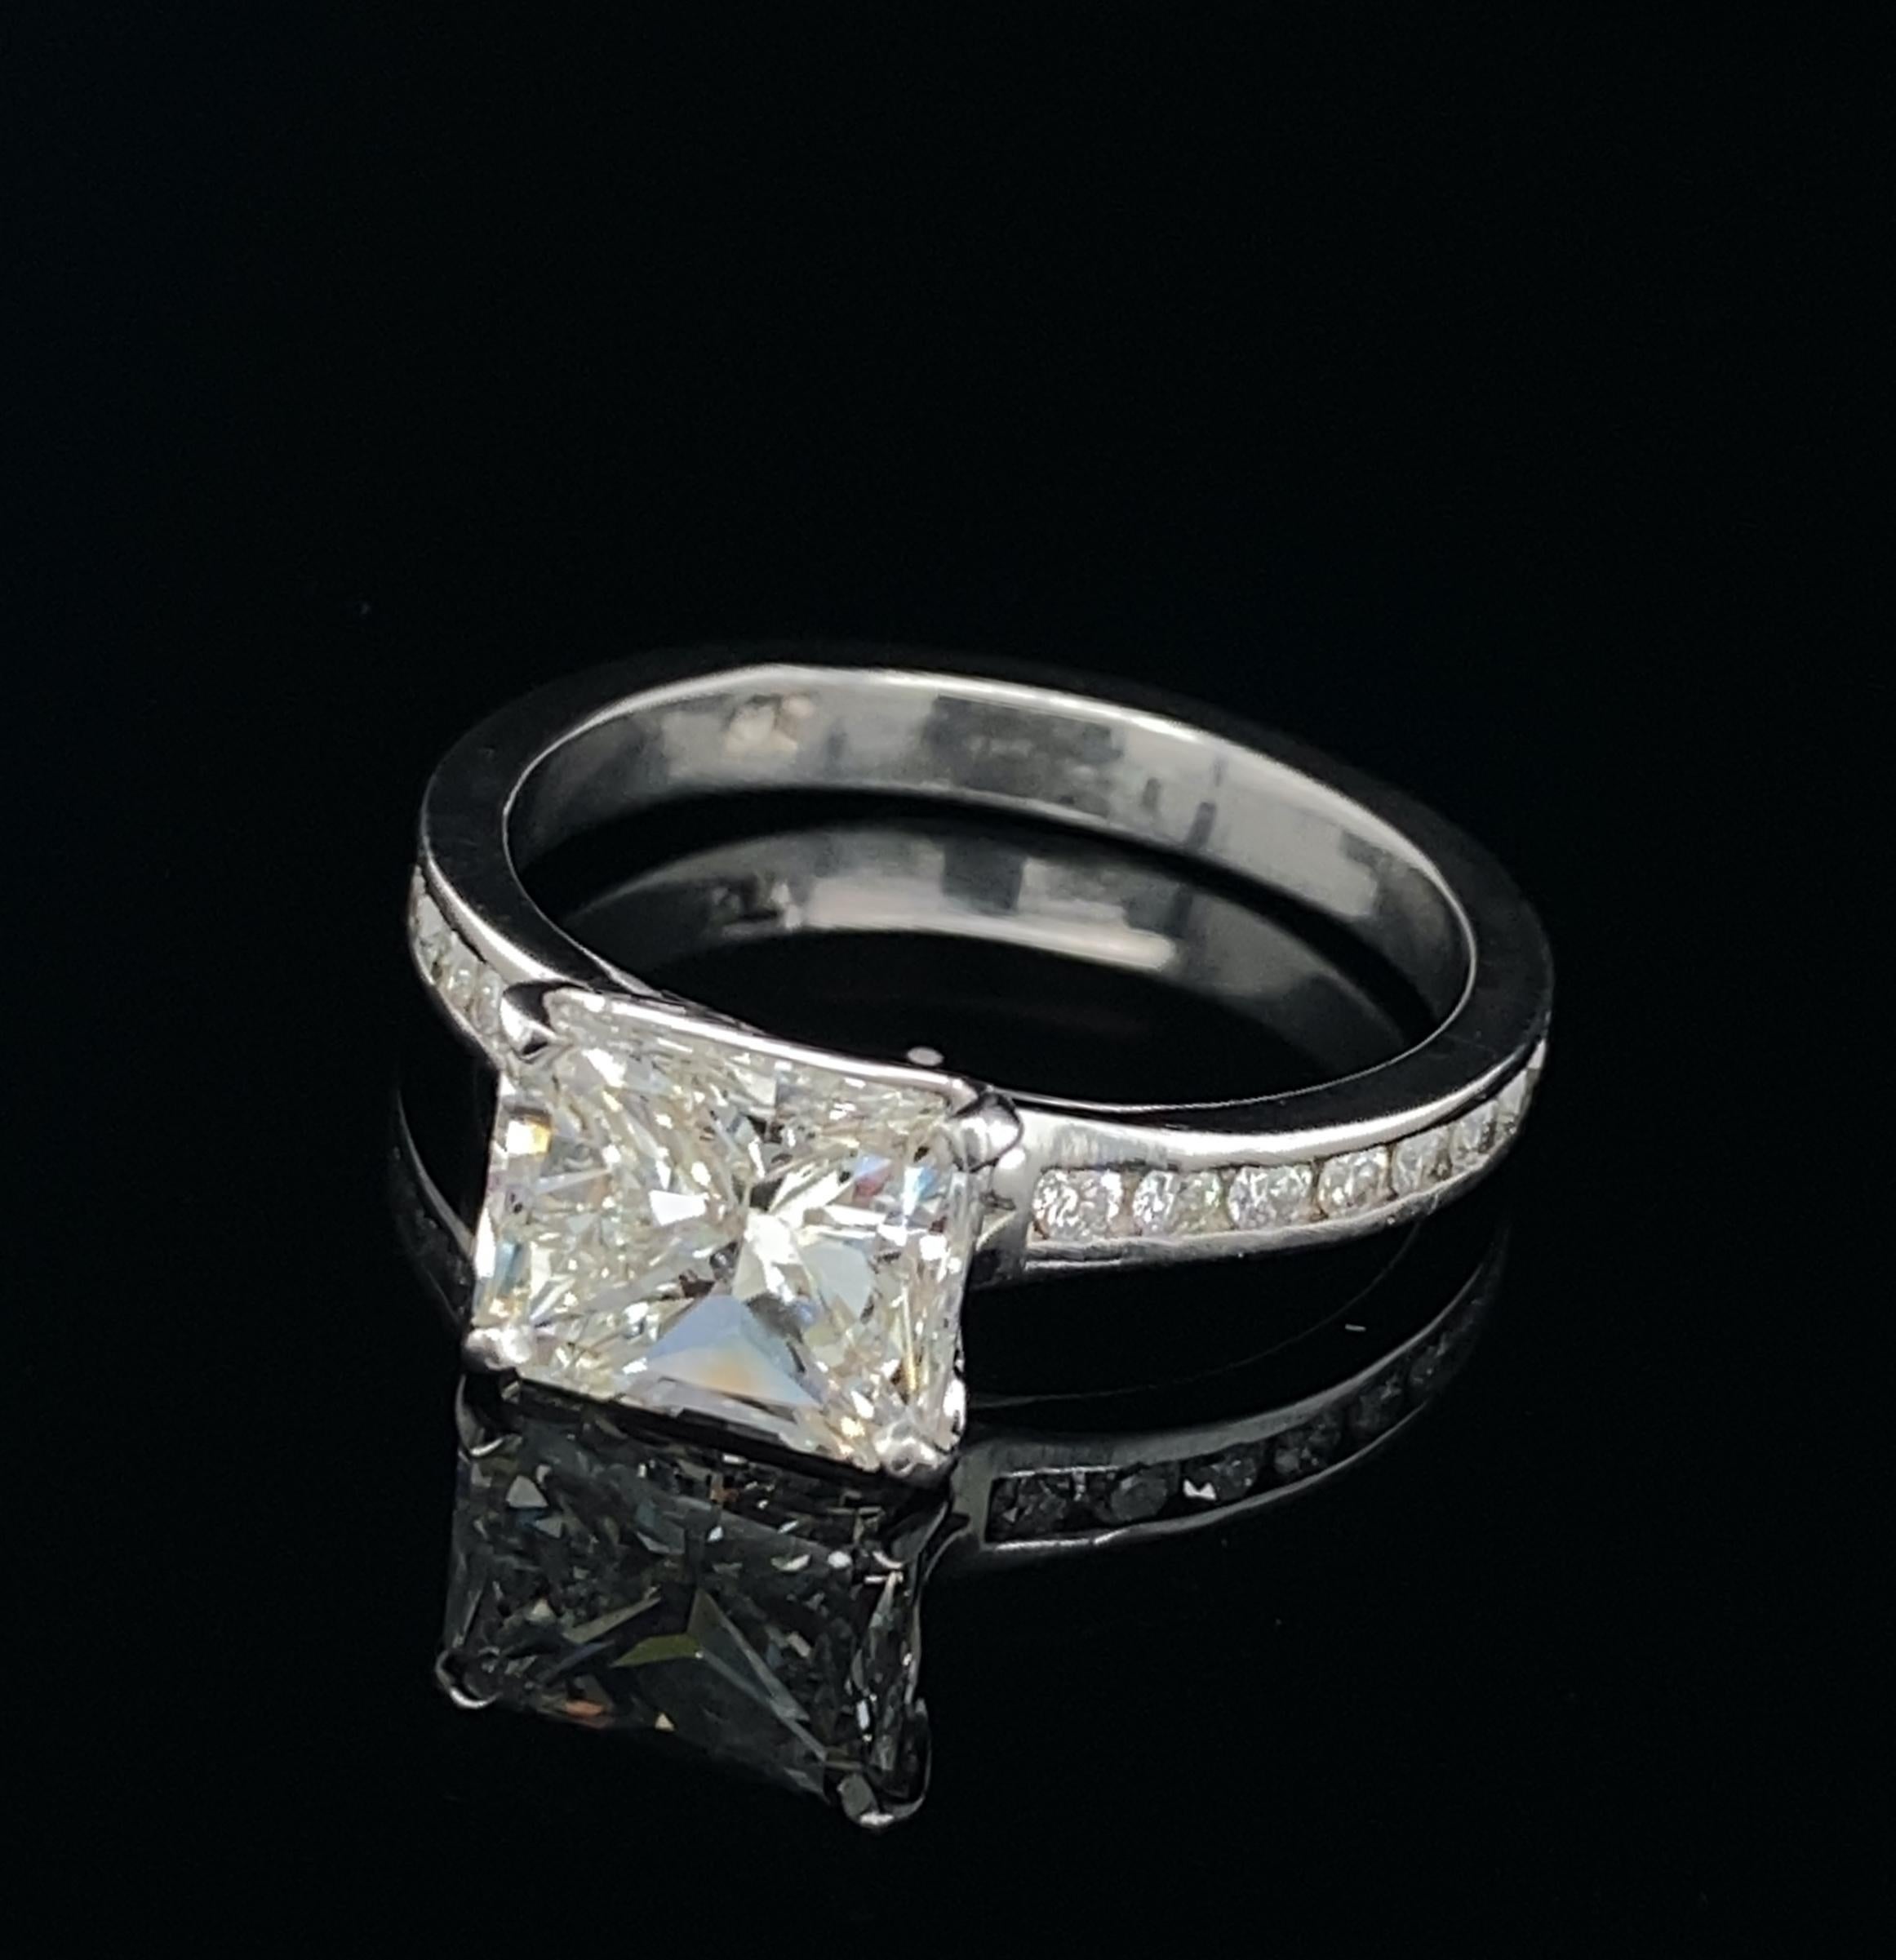 Contemporary 1.71 Carat GIA-Certified H-VS2 Radiant-Cut Diamond in Platinum Engagement Ring For Sale